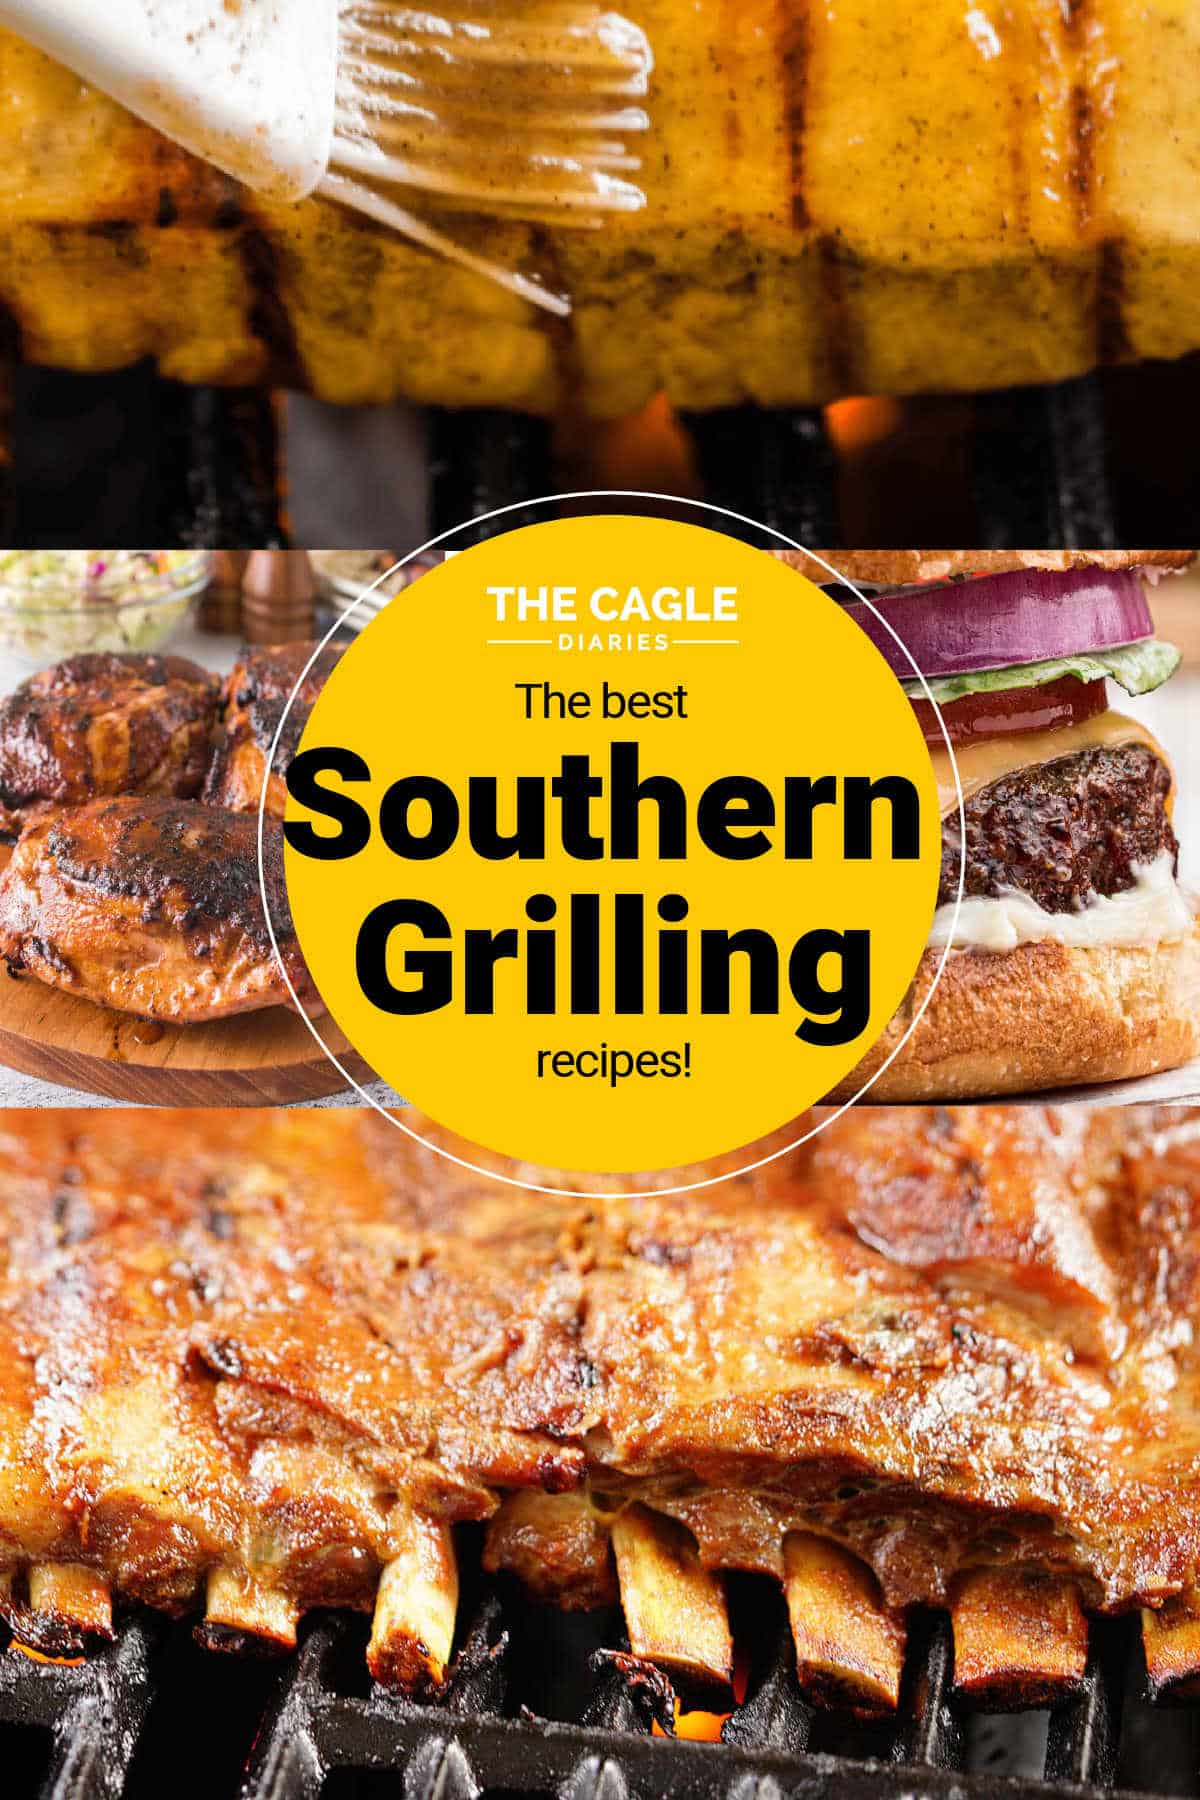 Collage of images showing different southern grilling recipes.